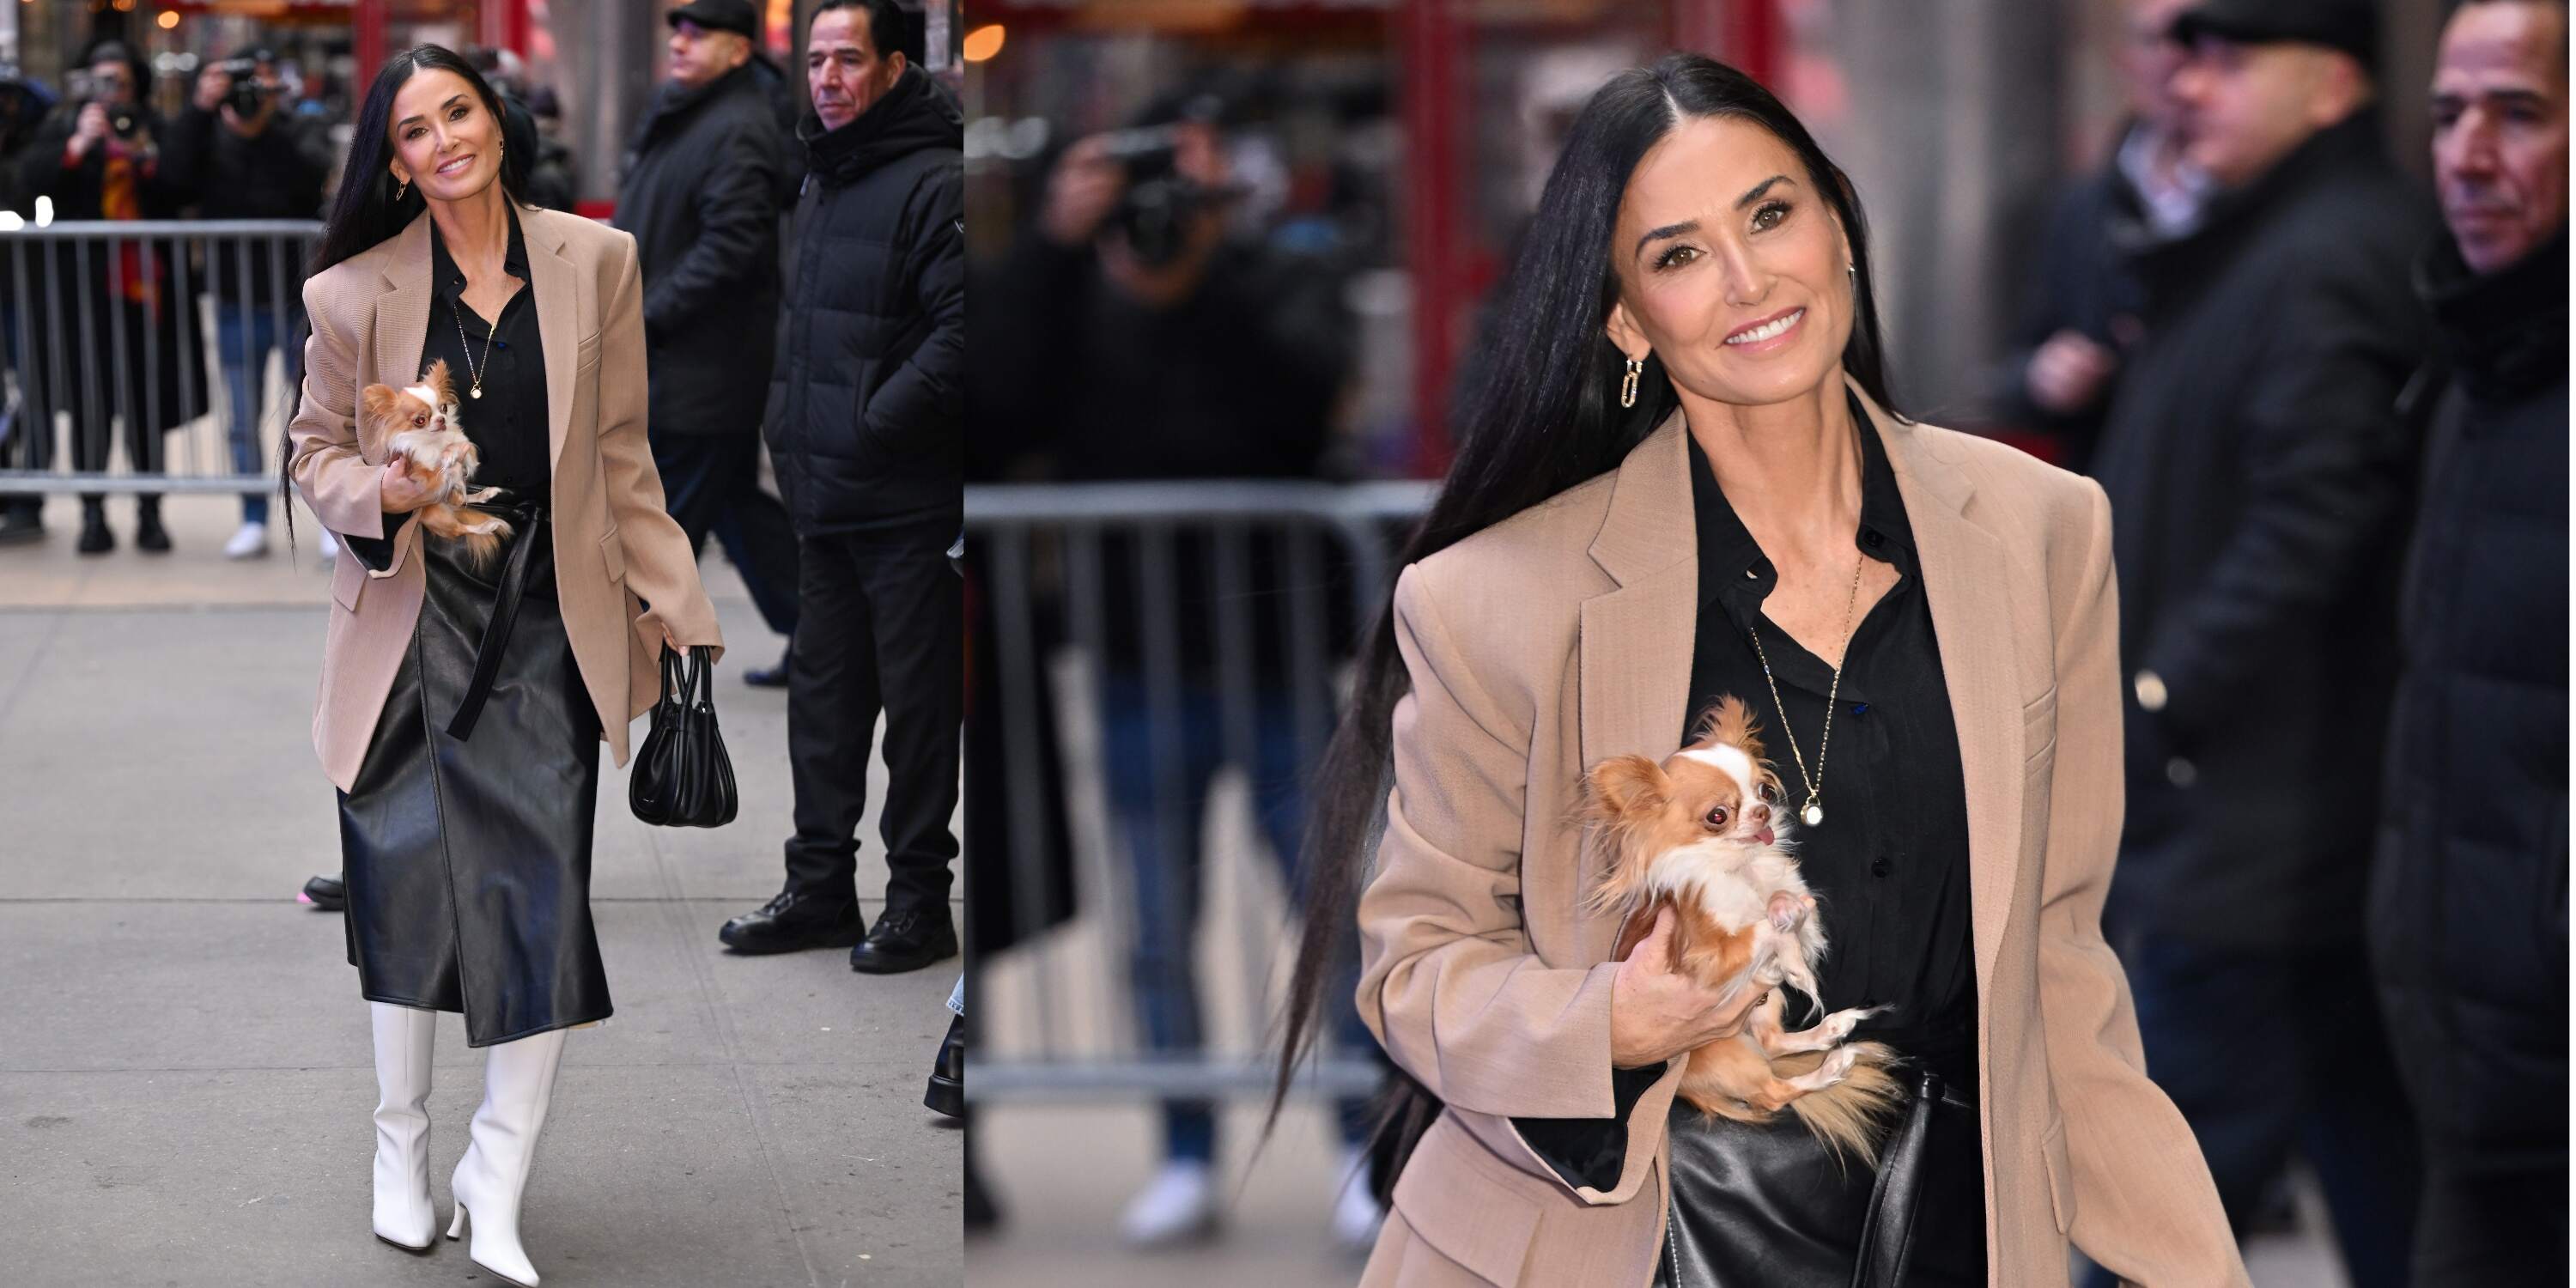 Actor Demi Moore walks with her chihuahua across a street in NYC while wearing a tan blazer and white boots